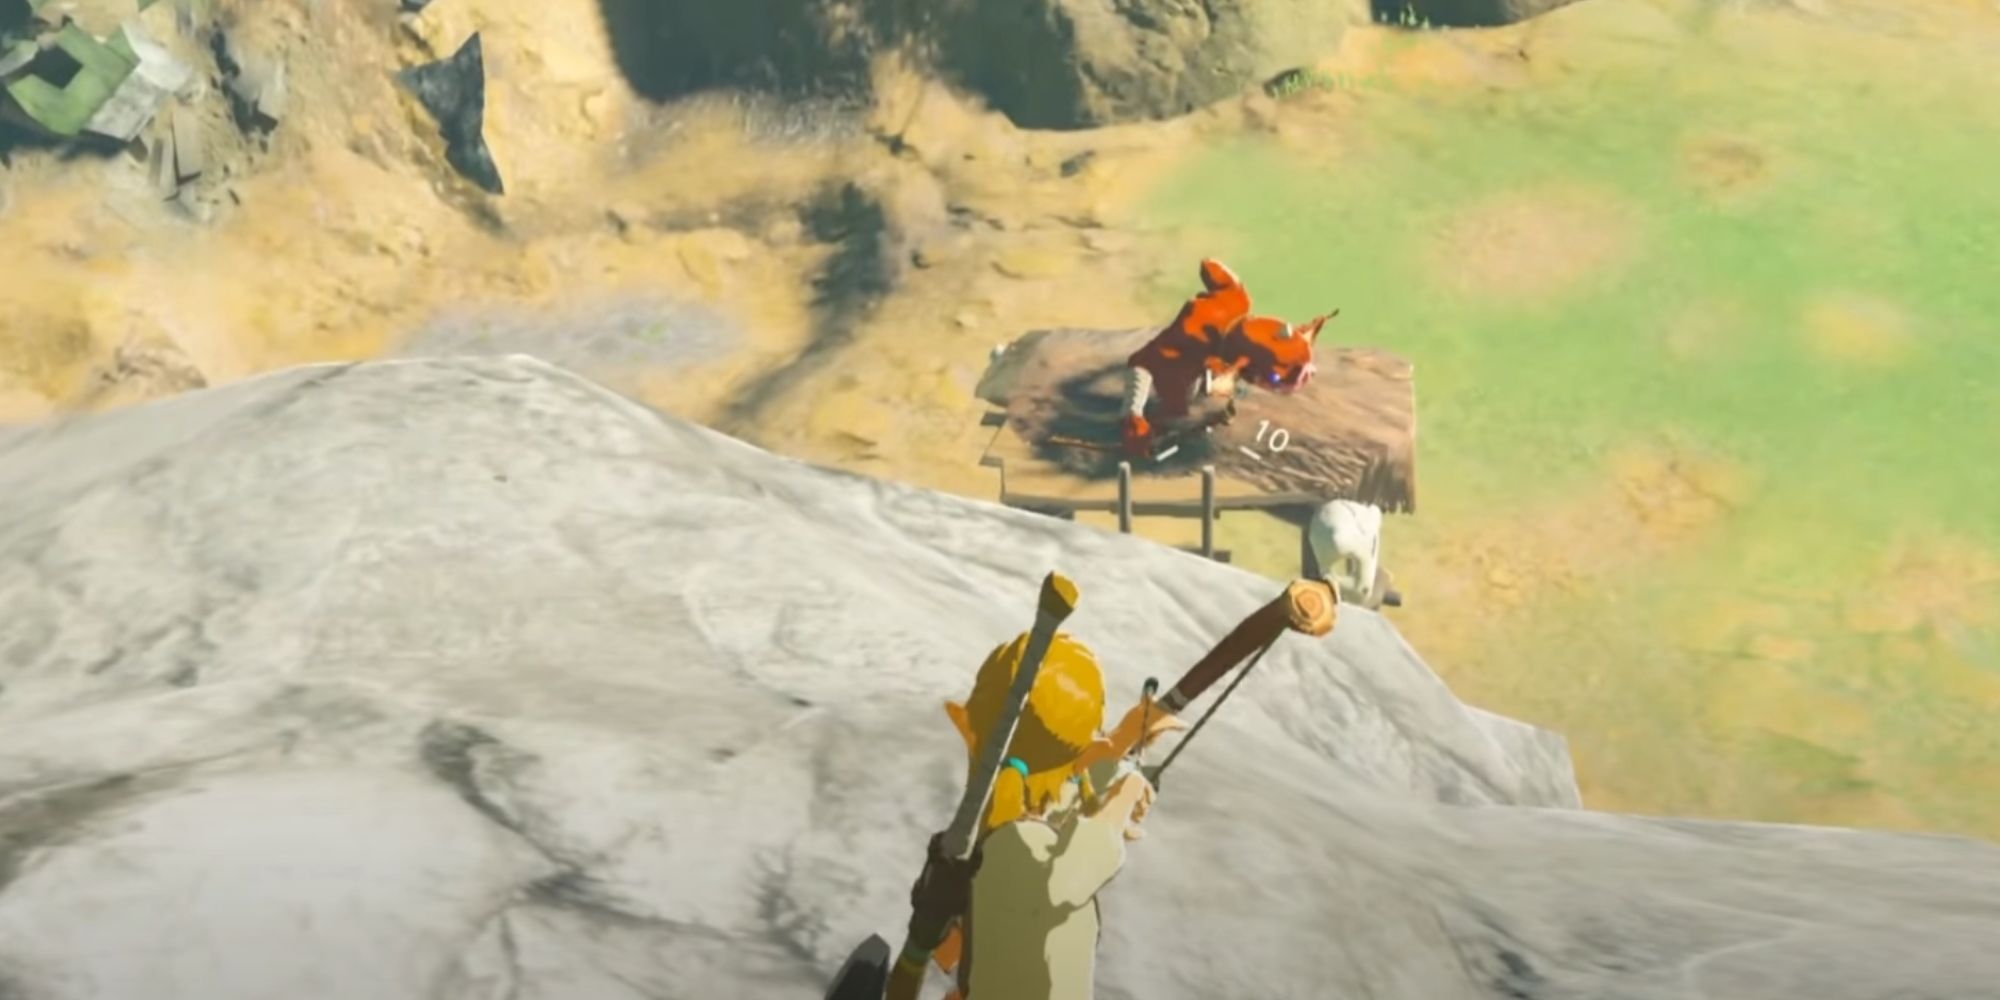 zelda_botw_link_aiming_with_a_bow